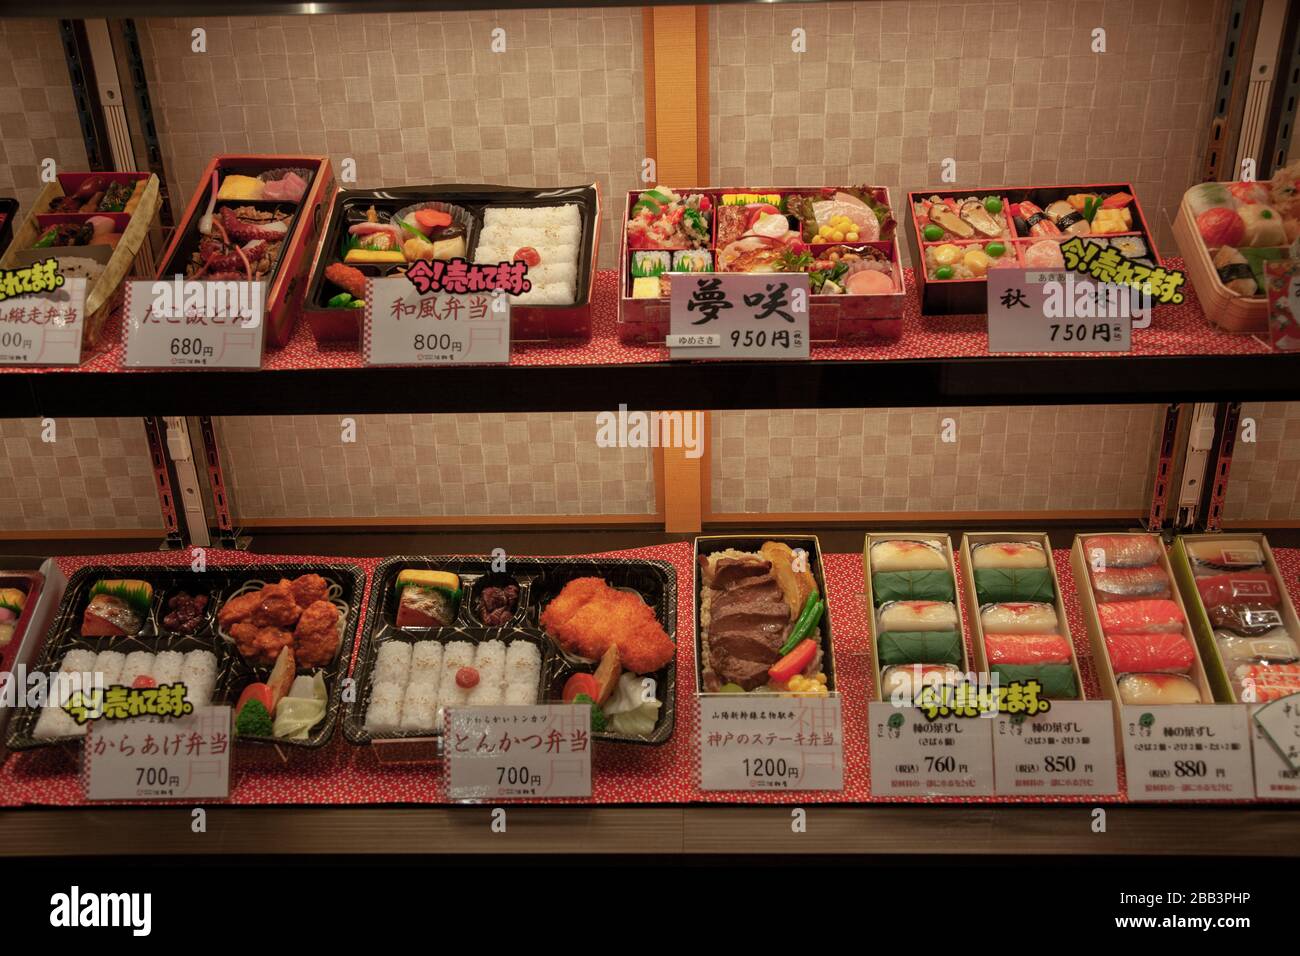 Stall selling Bento boxes. A Bento box is a single-portion takeout or home-packed meal common in Japanese cuisine. Photographed at the Osaka Train sta Stock Photo